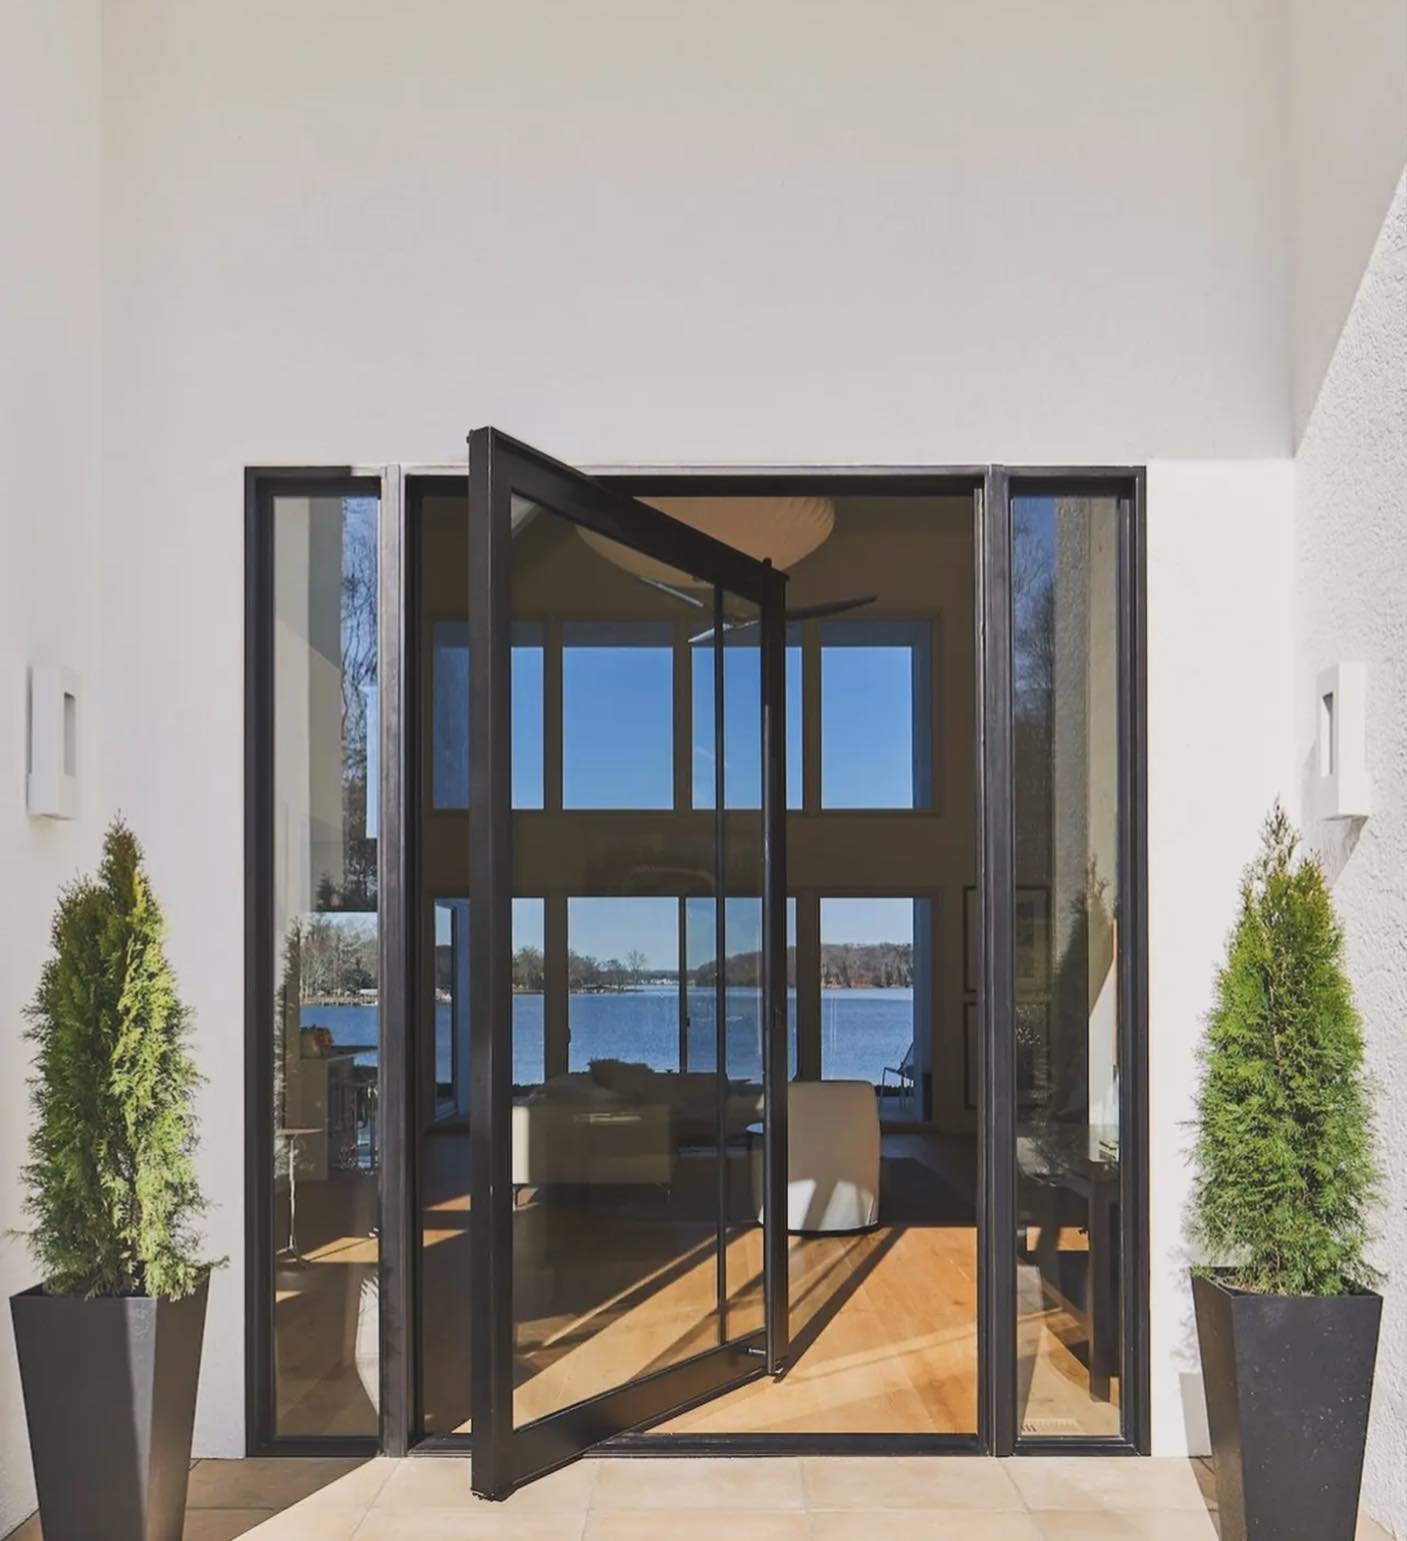 Step into a world of grandeur and sophistication with pivot doors Installed by Paul himself. Elevate your space with our stunning collection of pivot doors, meticulously crafted to make a bold statement and create a lasting impression.

Our pivot doo